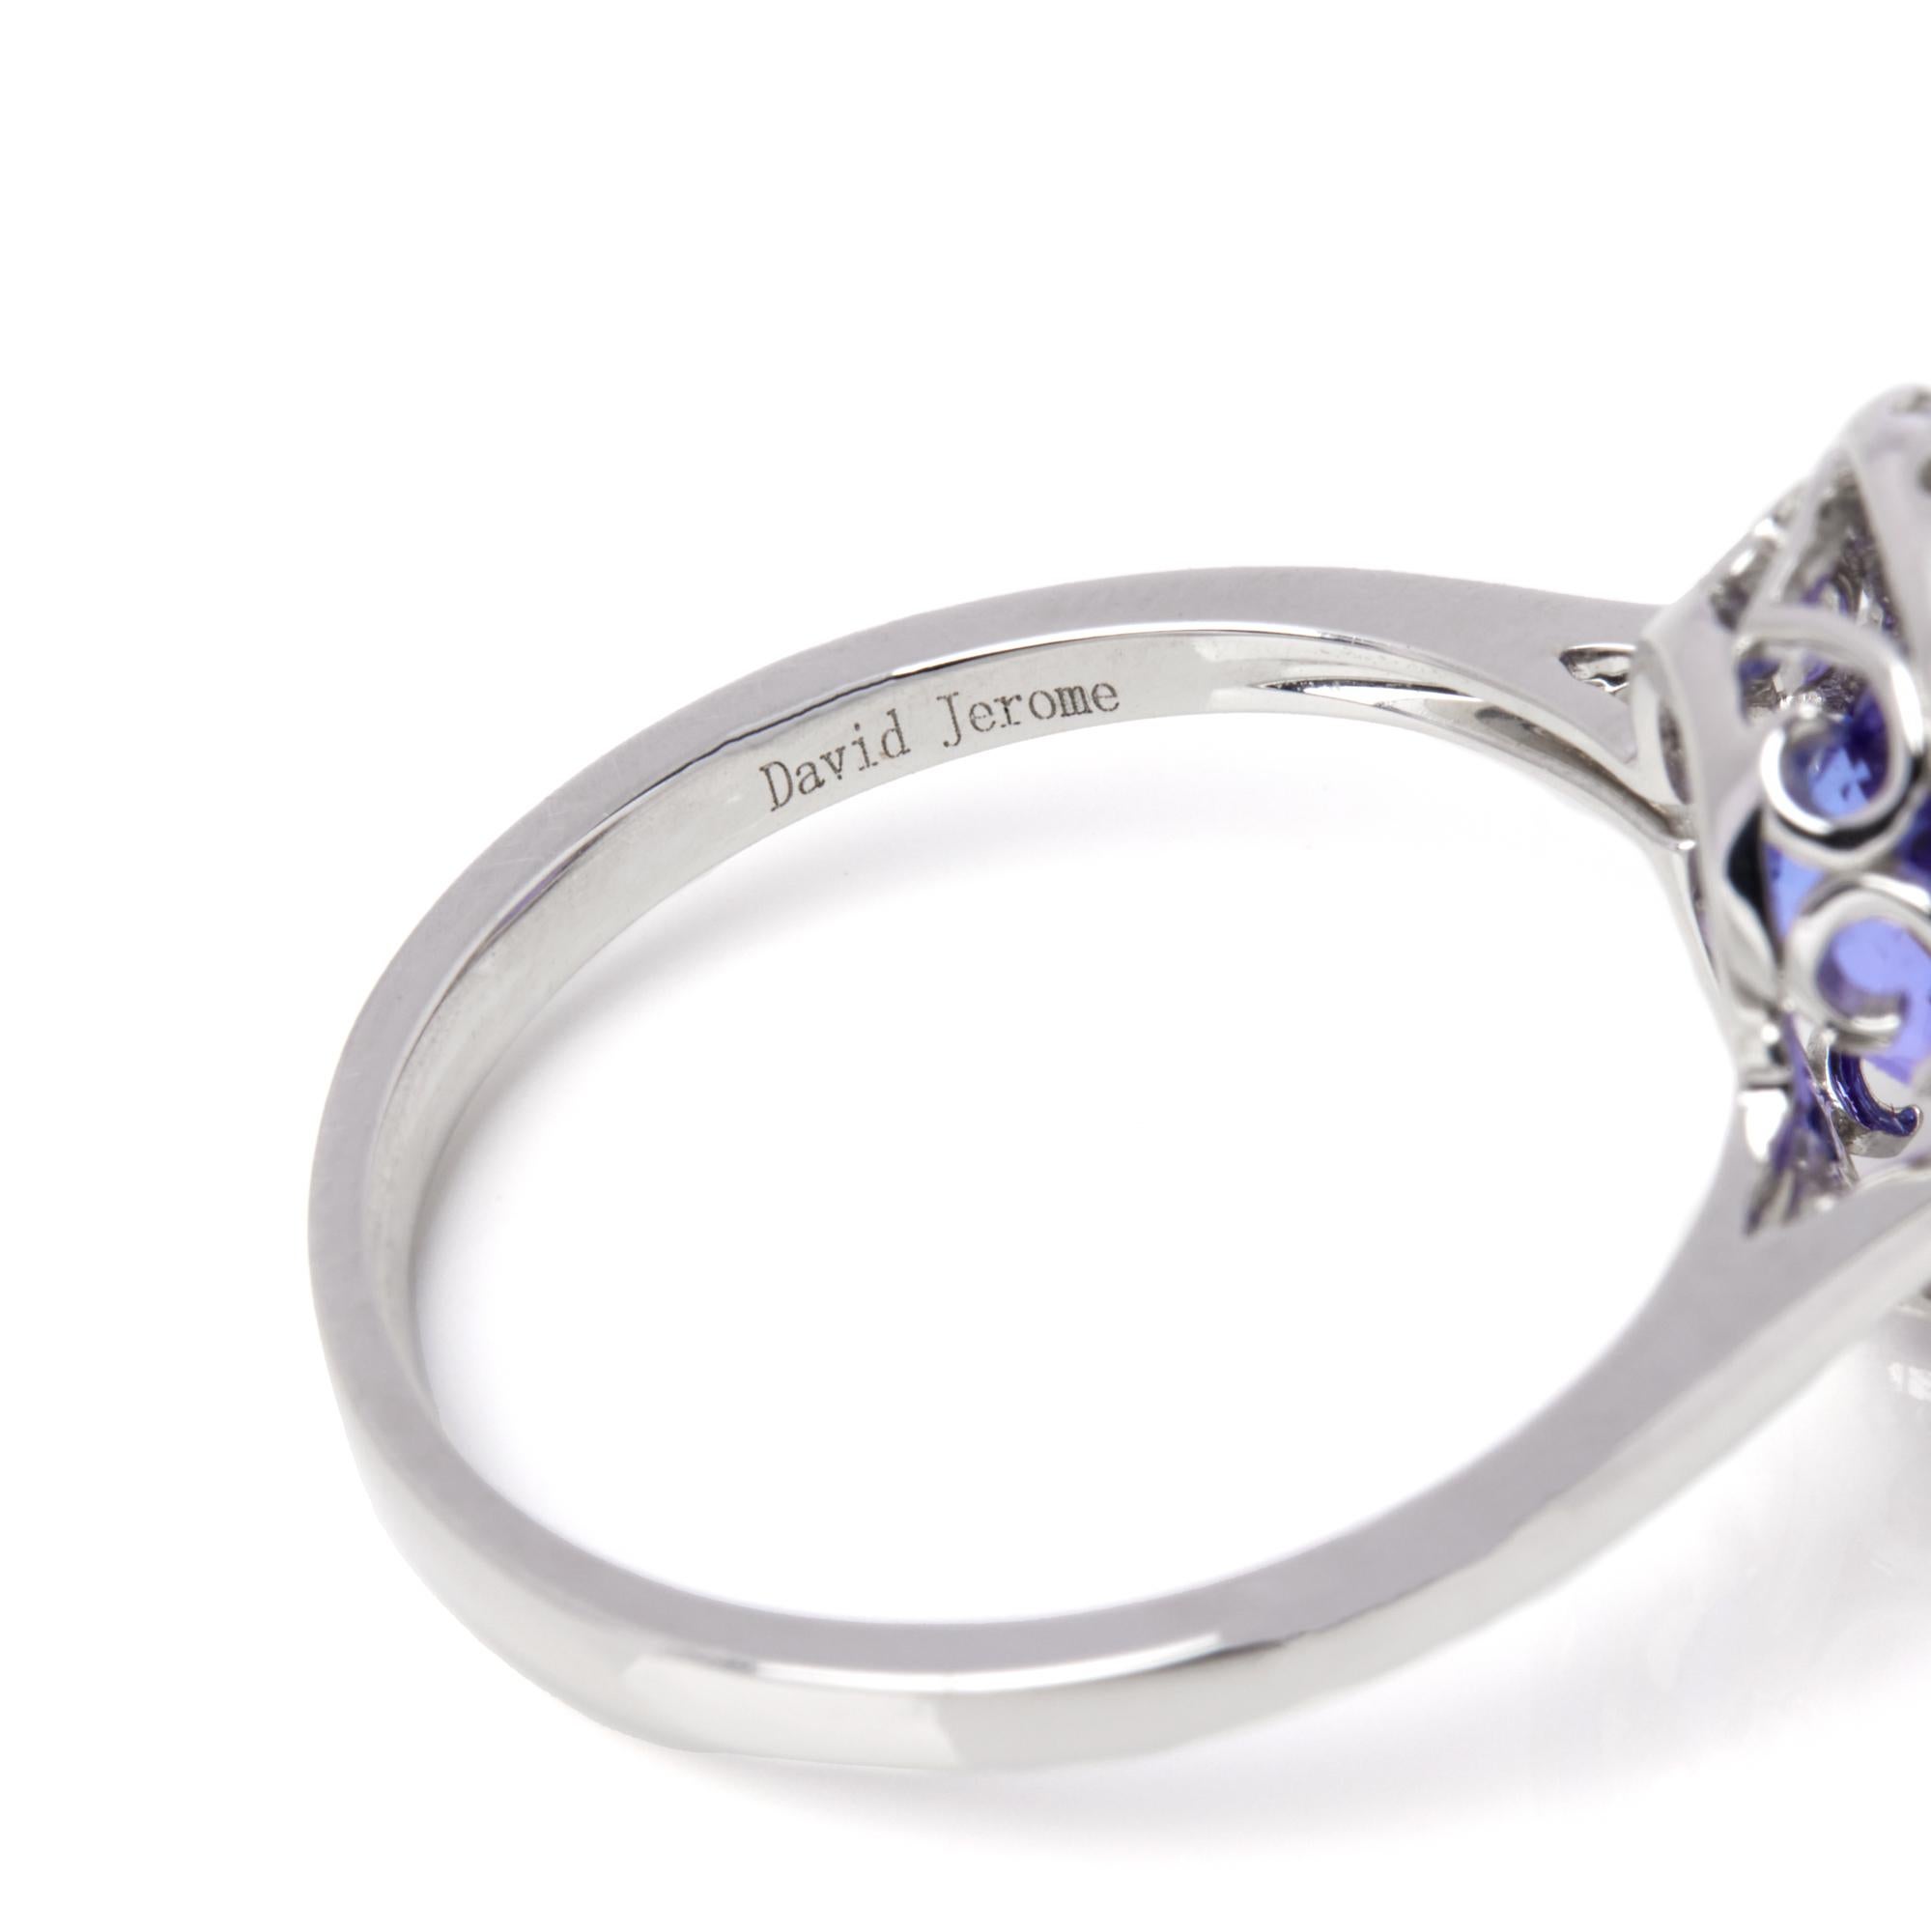 David Jerome Certified 4.23ct Oval Cut Tanzanite and Diamond Ring For Sale 1